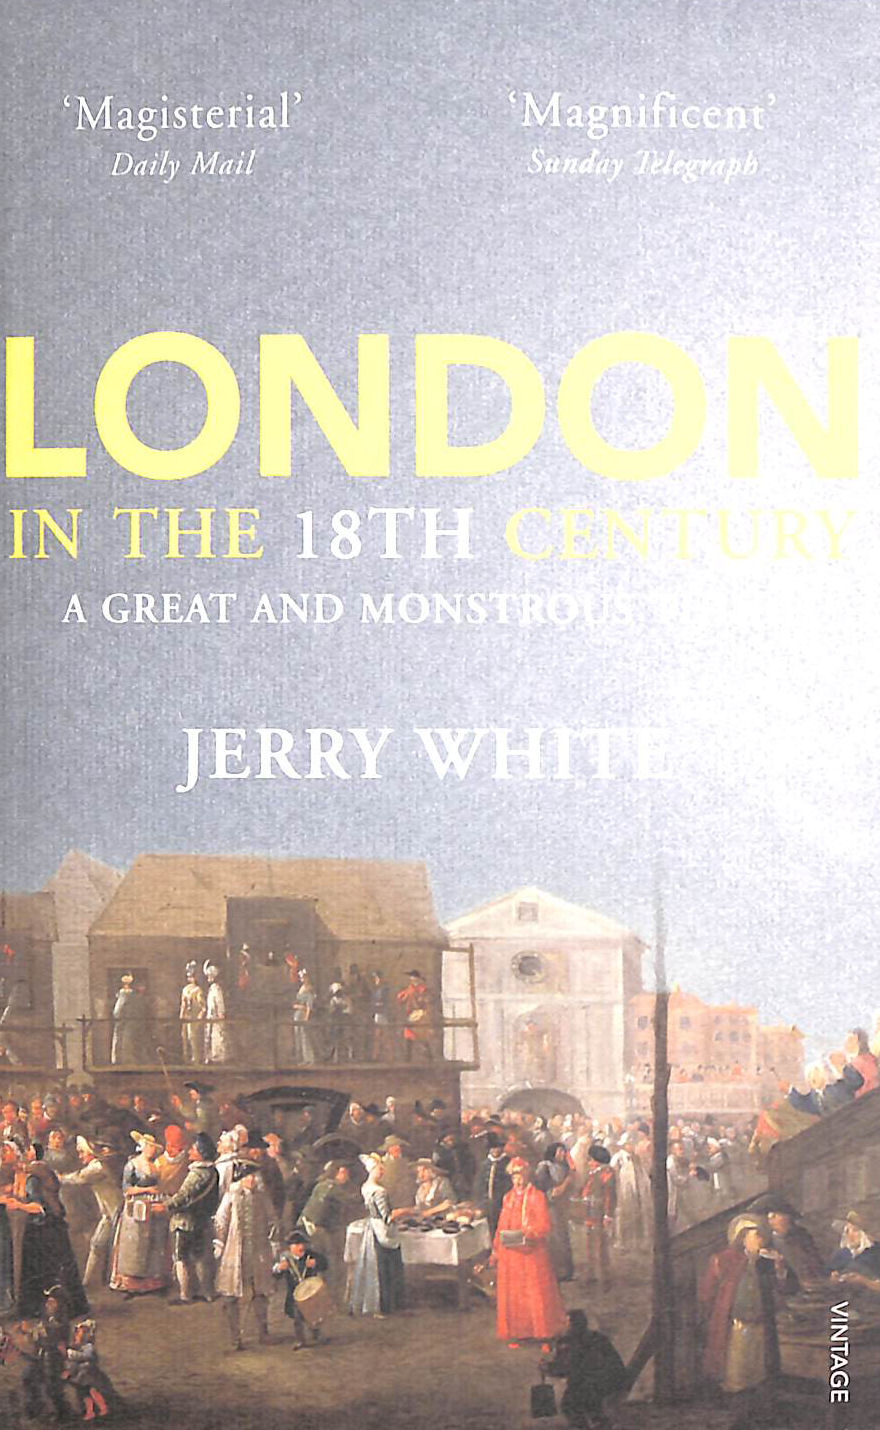 WHITE, JERRY - London In The Eighteenth Century: A Great and Monstrous Thing